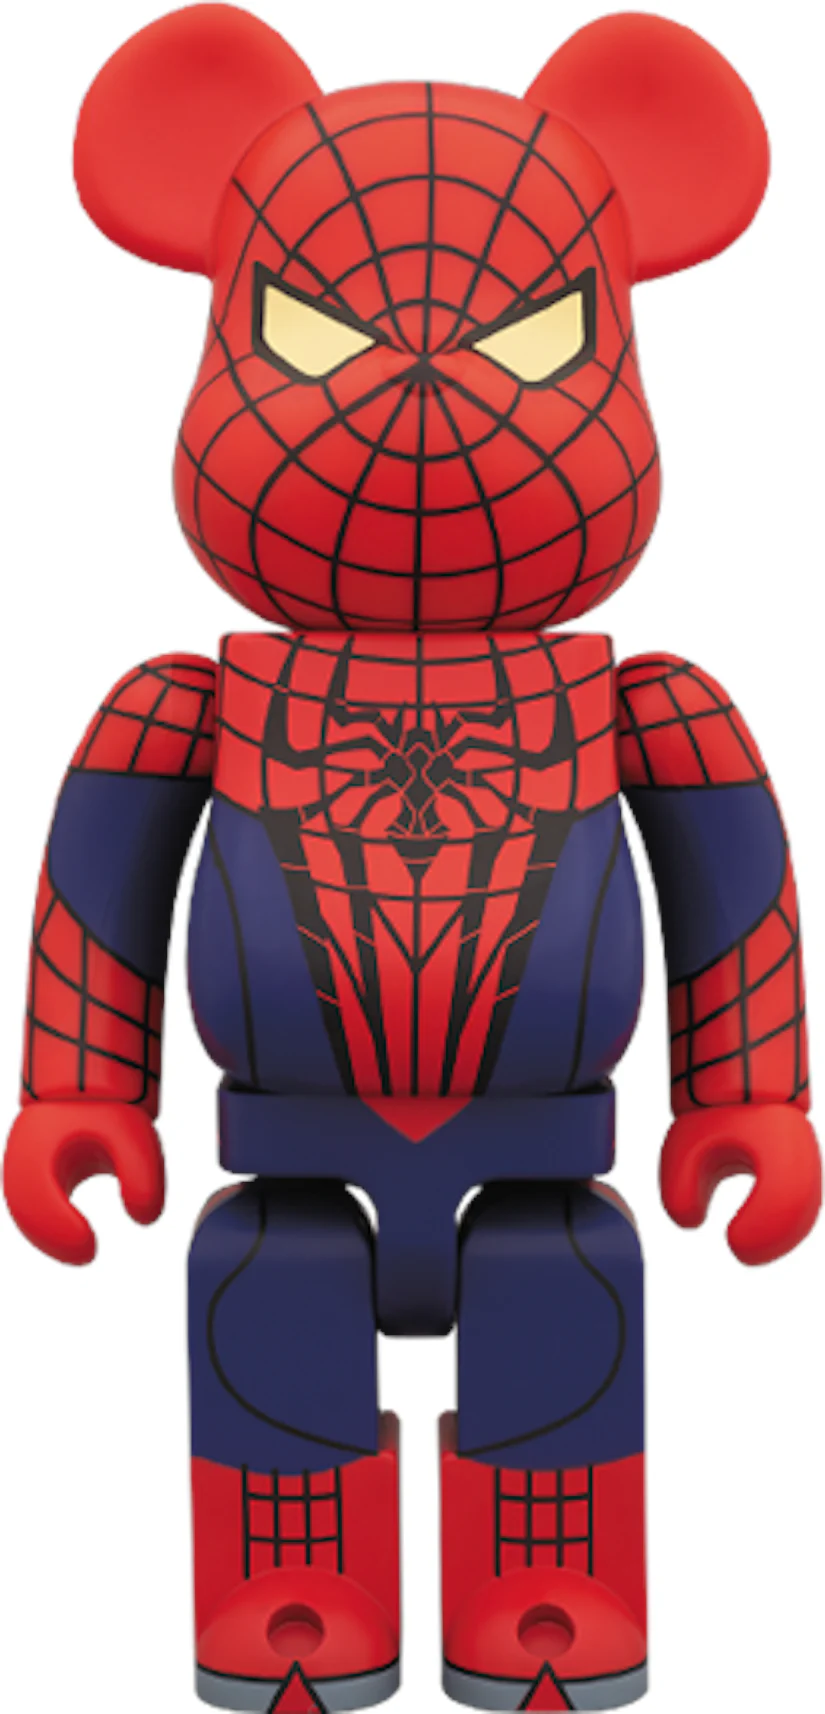 Bearbrick x The Amazing Spider-Man 400% Red - US